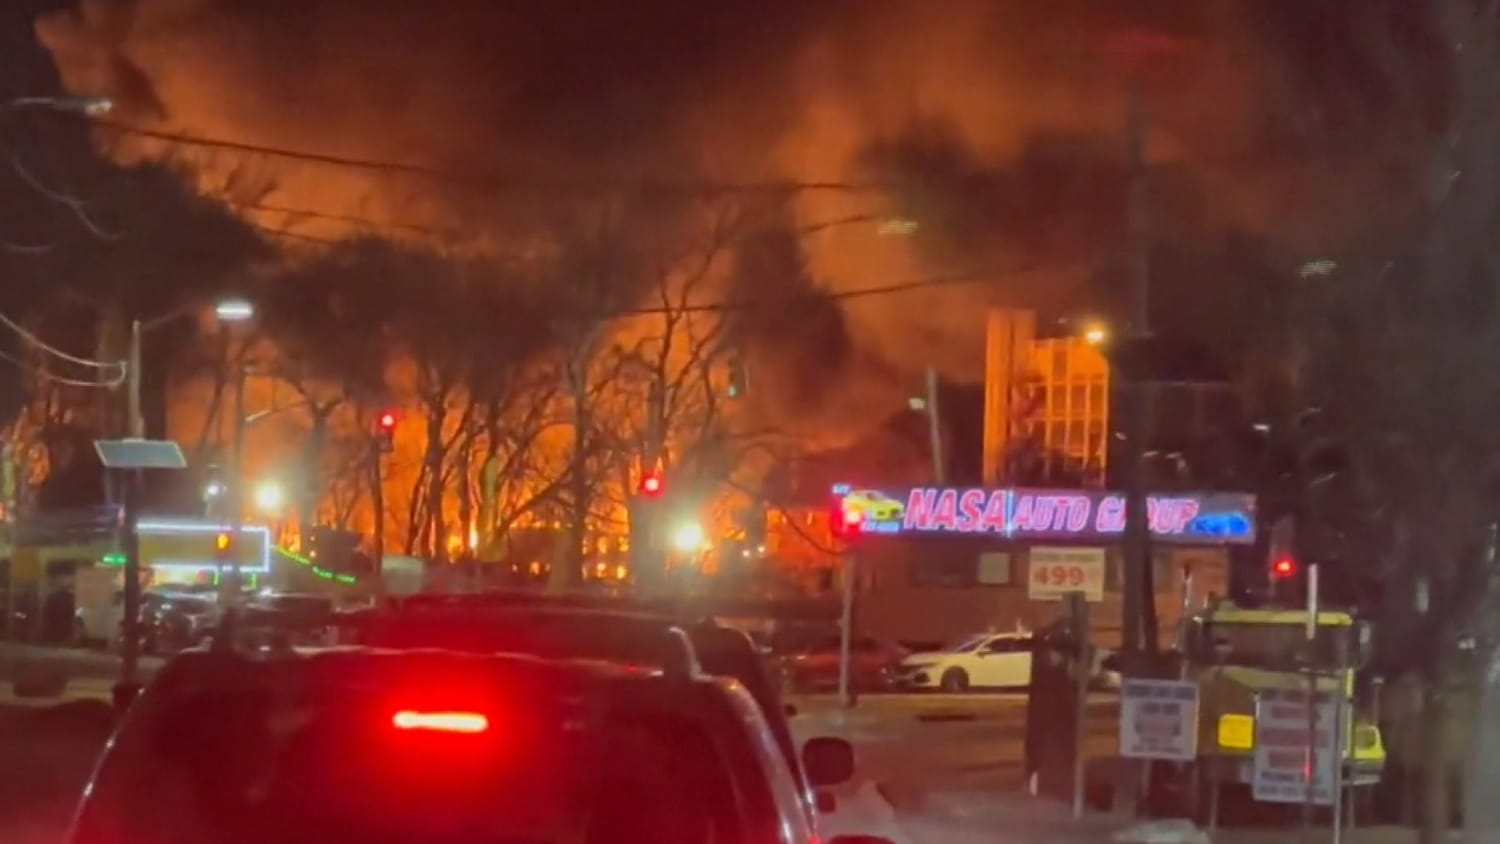 Firefighter injured in blaze at chemical plant in Passaic, N.J.